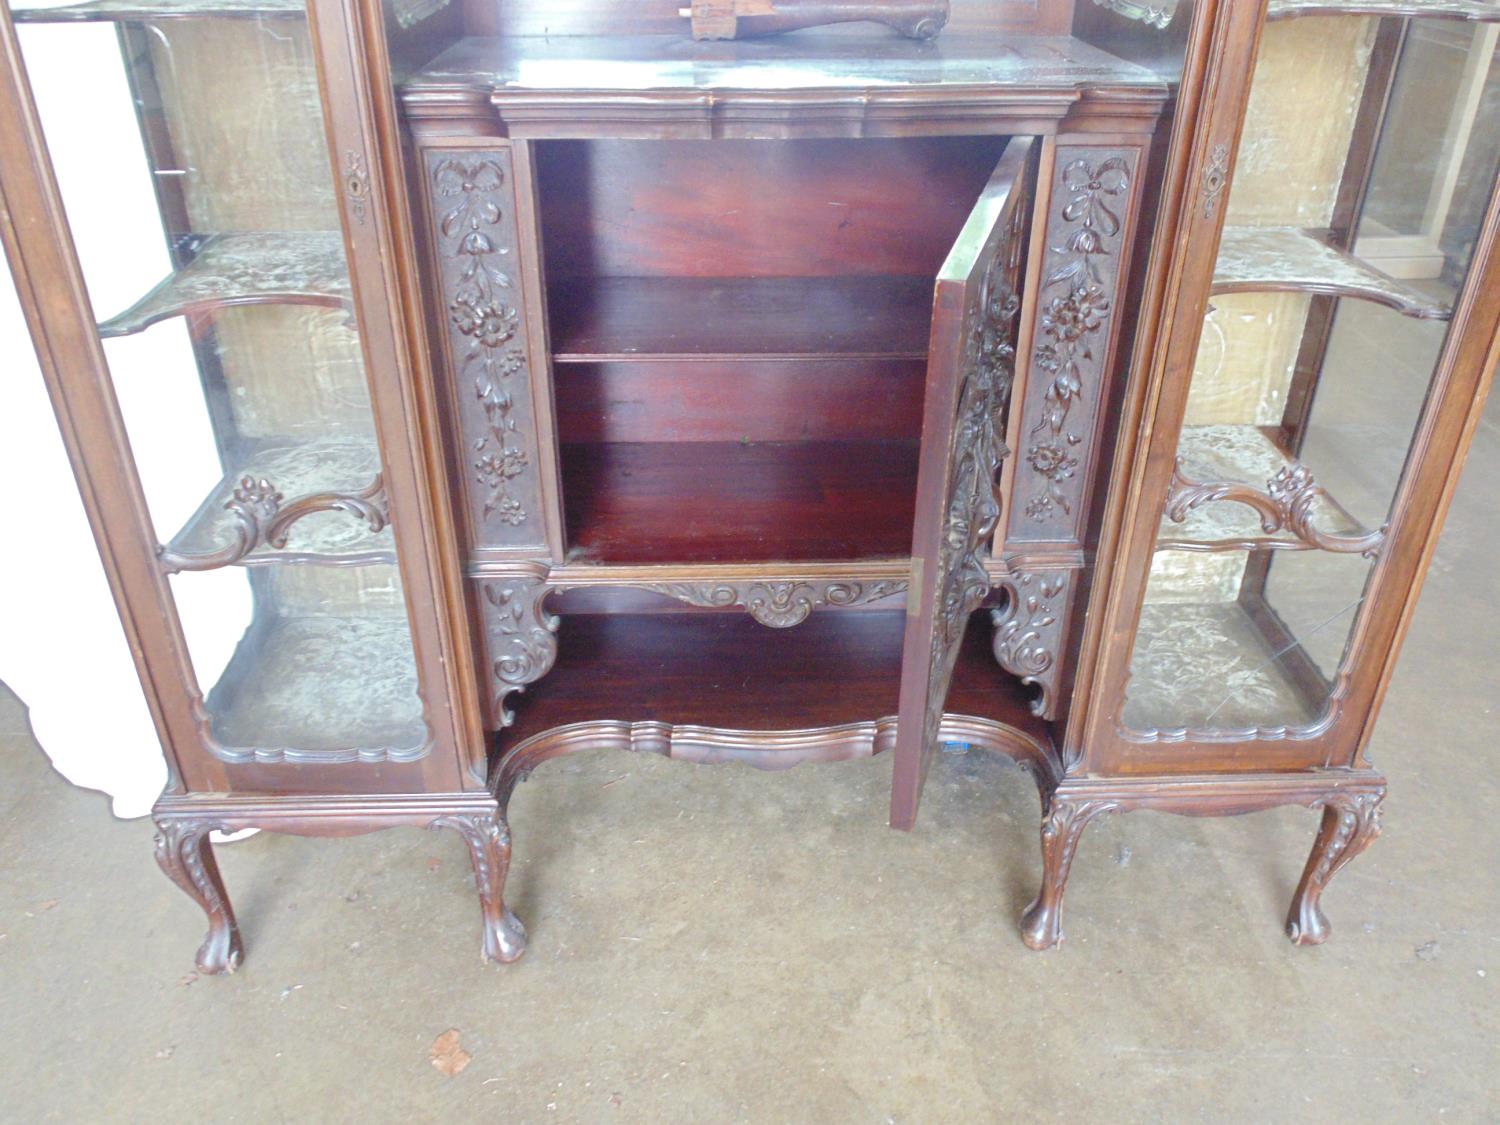 Mahogany display cabinet with mirror back, standing on carved cabriole legs - 155cm x 46cm x 181cm - Image 3 of 6